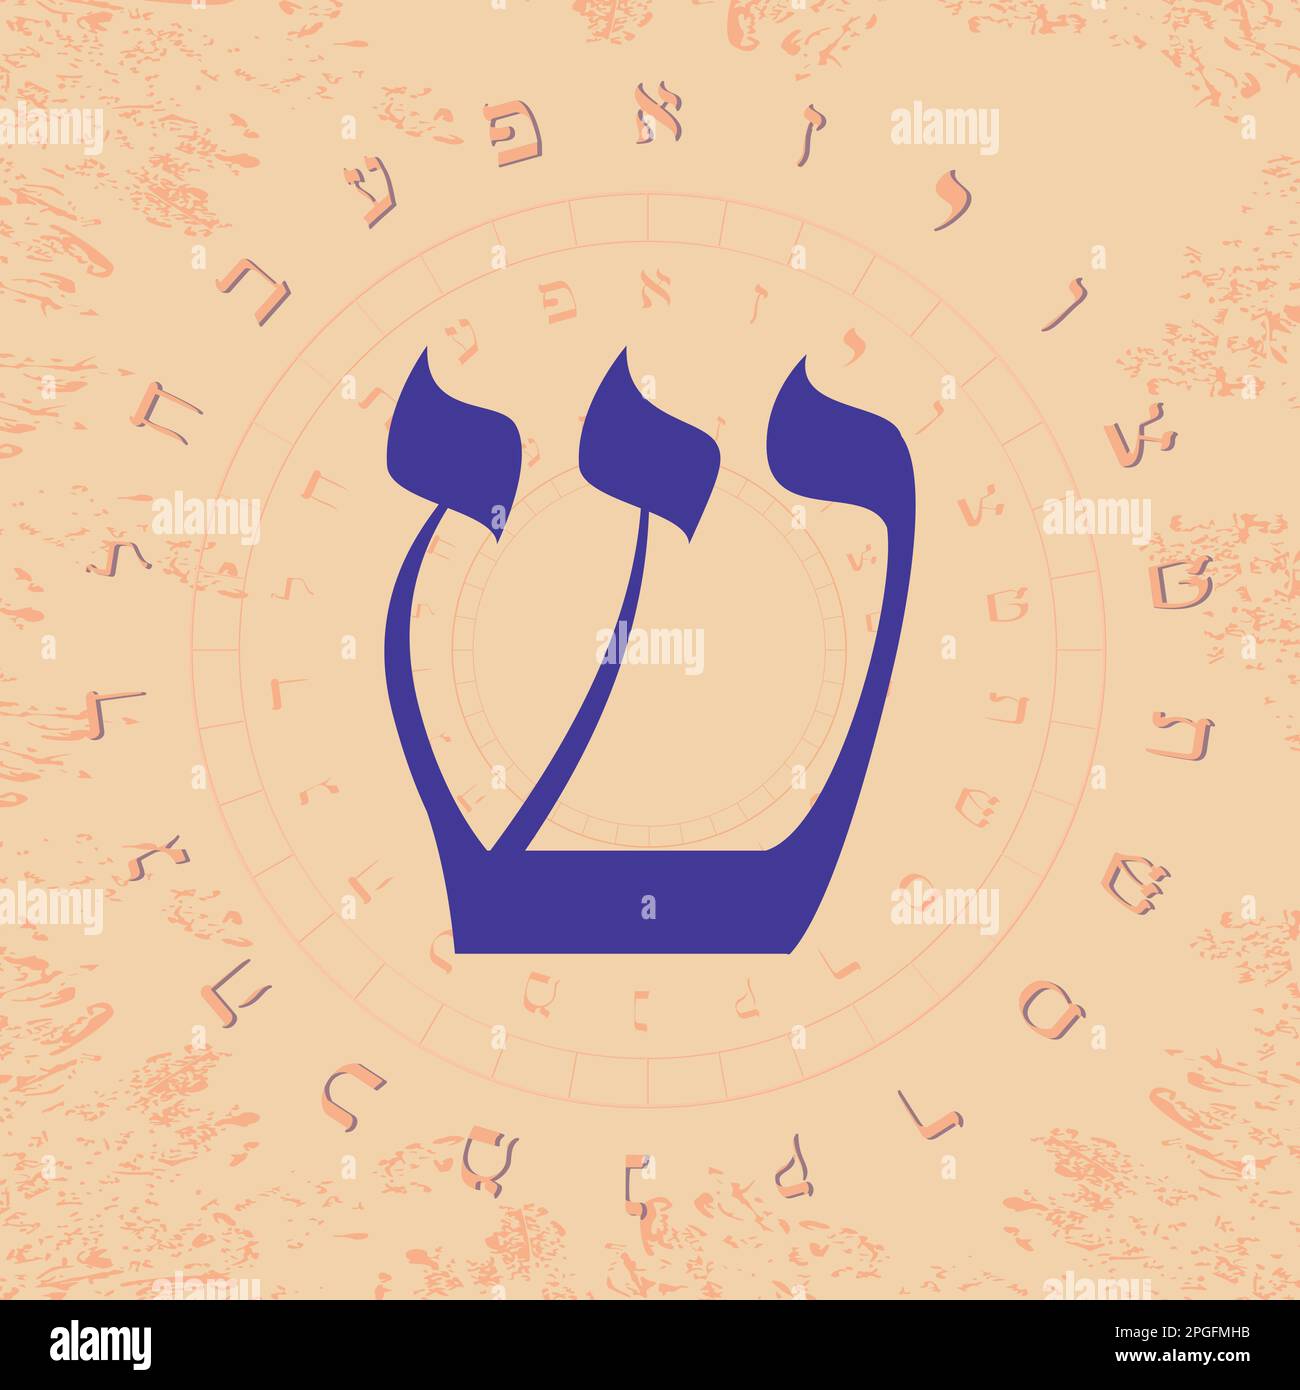 Vector illustration of the Hebrew alphabet in circular design. Hebrew letter called Shin large and blue. Stock Vector